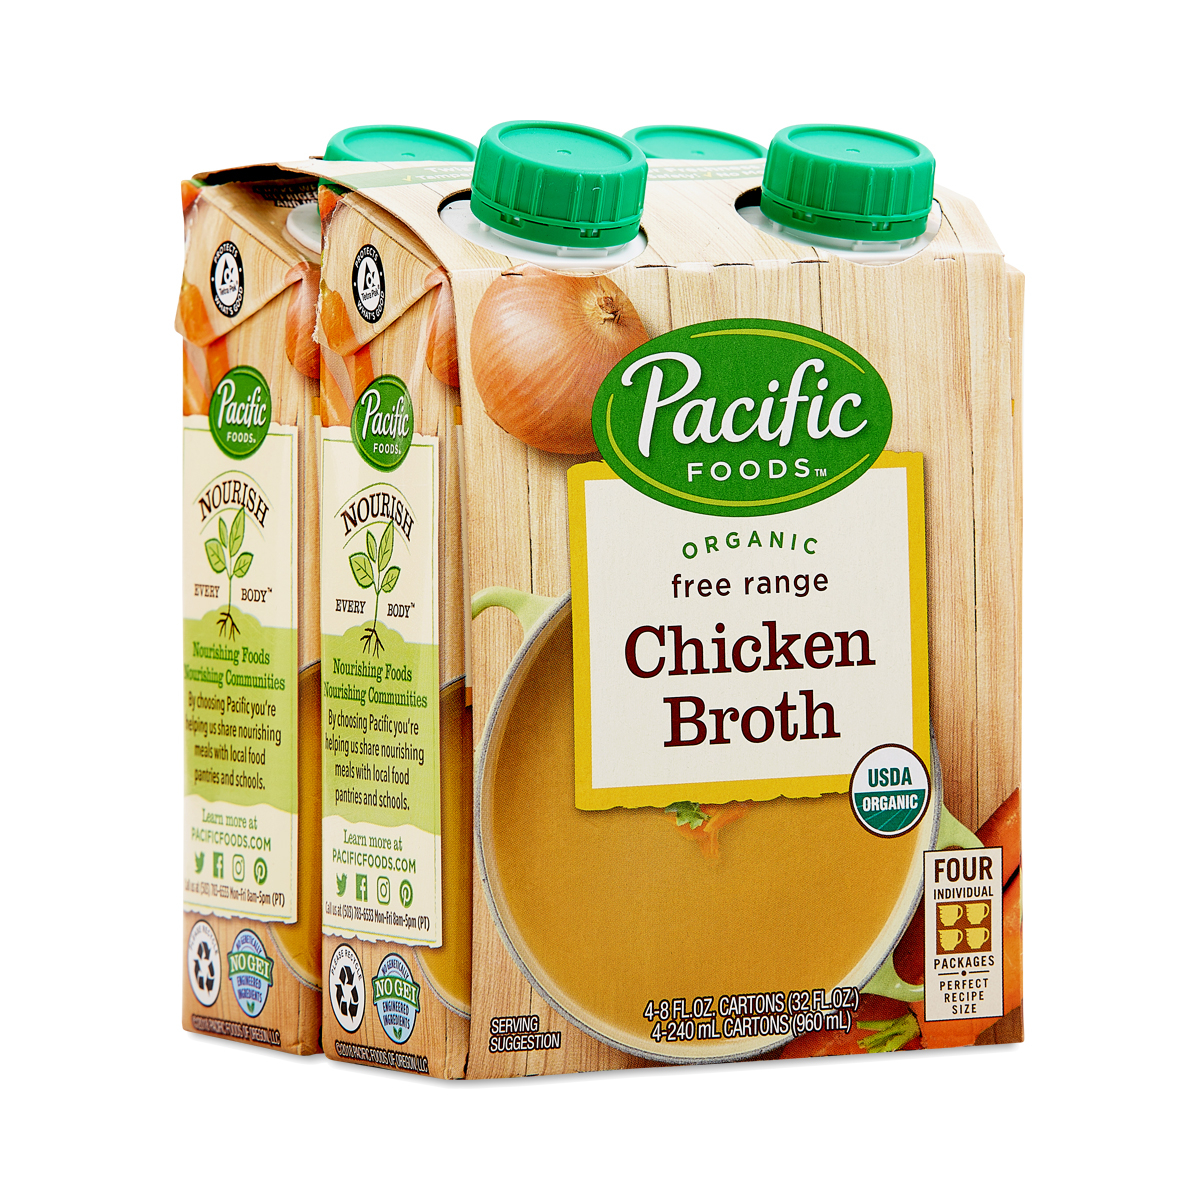 Pacific Foods Organic Free Range Chicken Broth four 8 oz containers